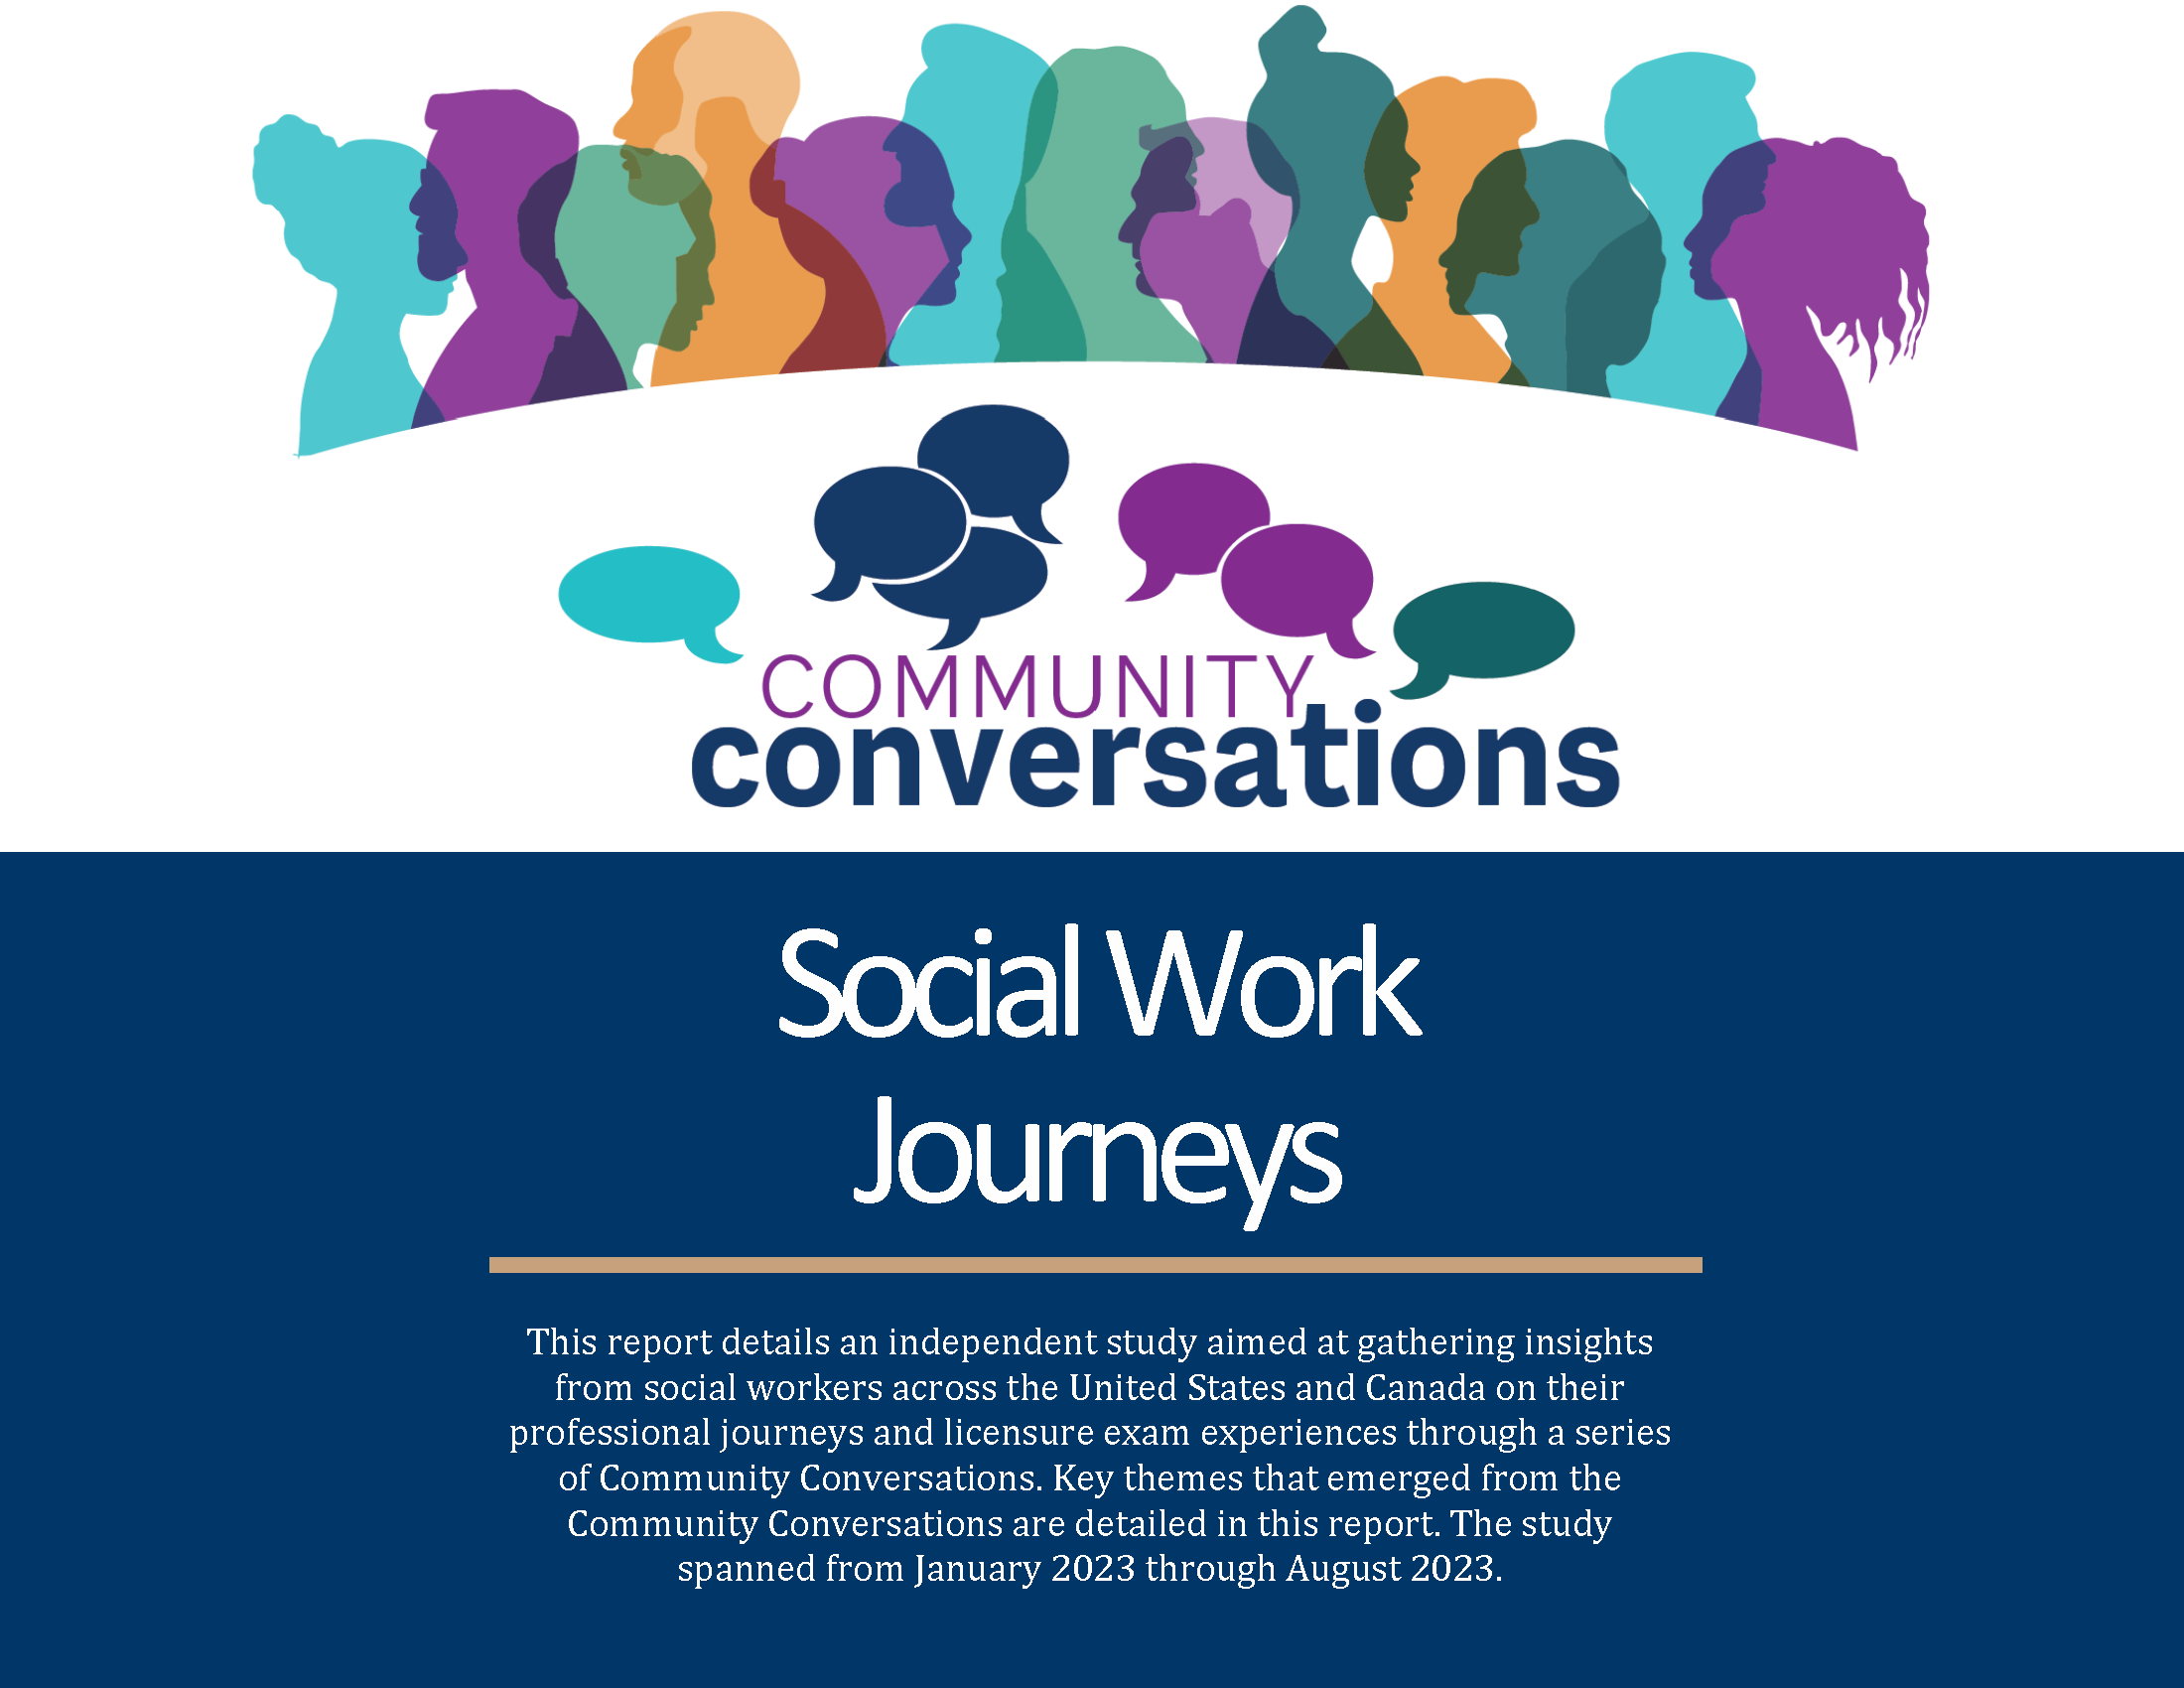 Cover to the Community Conversations research report. The subtitle is "Social Work Journeys".